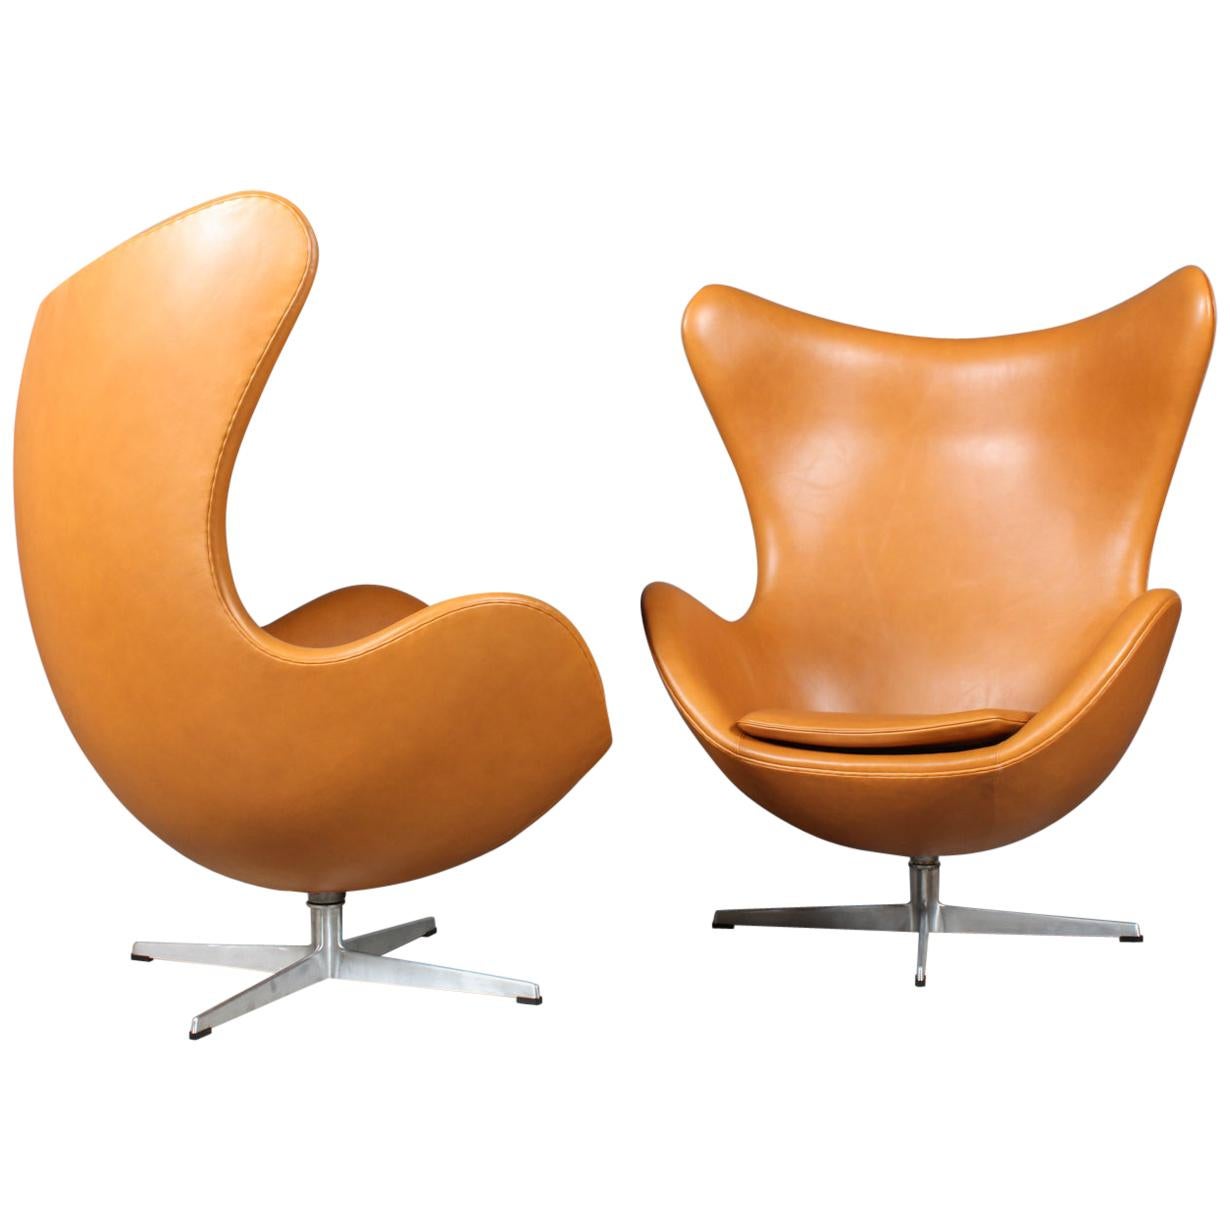 Arne Jacobsen Egg Chairs from Hotel Royal